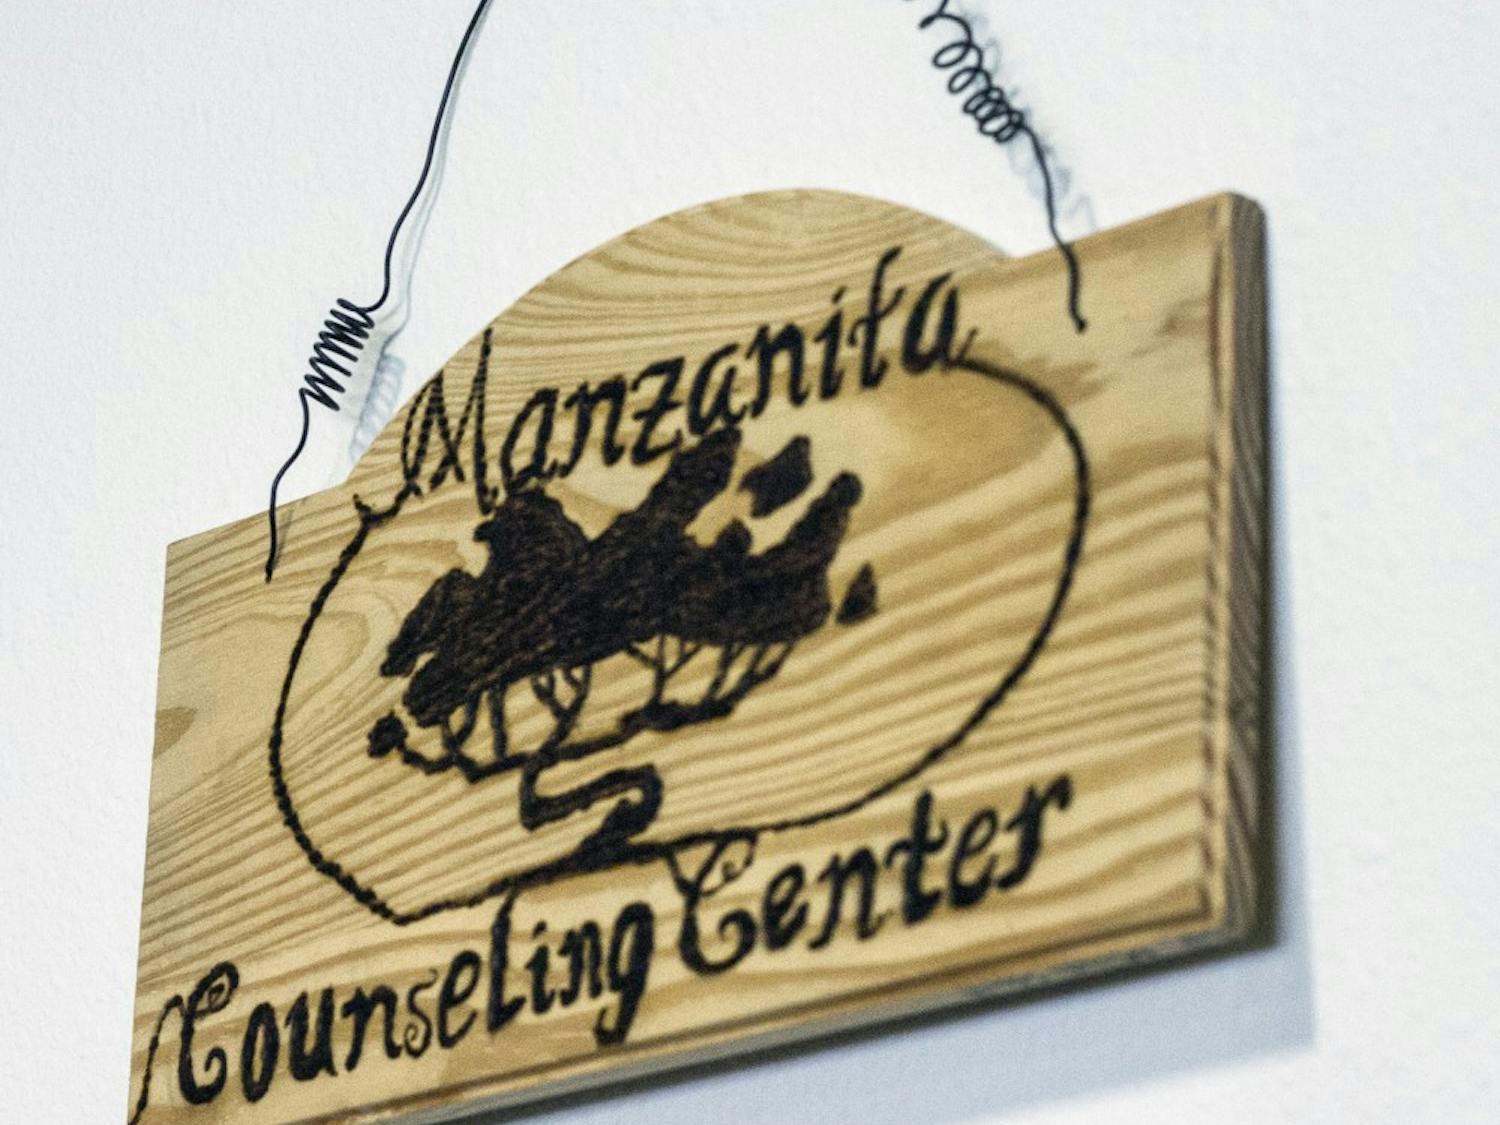 A sign hangs at the entrance to the Manzanita Counseling Center. The center offers free services and is ran by graduate students who are under the supervision of licensed counselors.&nbsp;&nbsp;